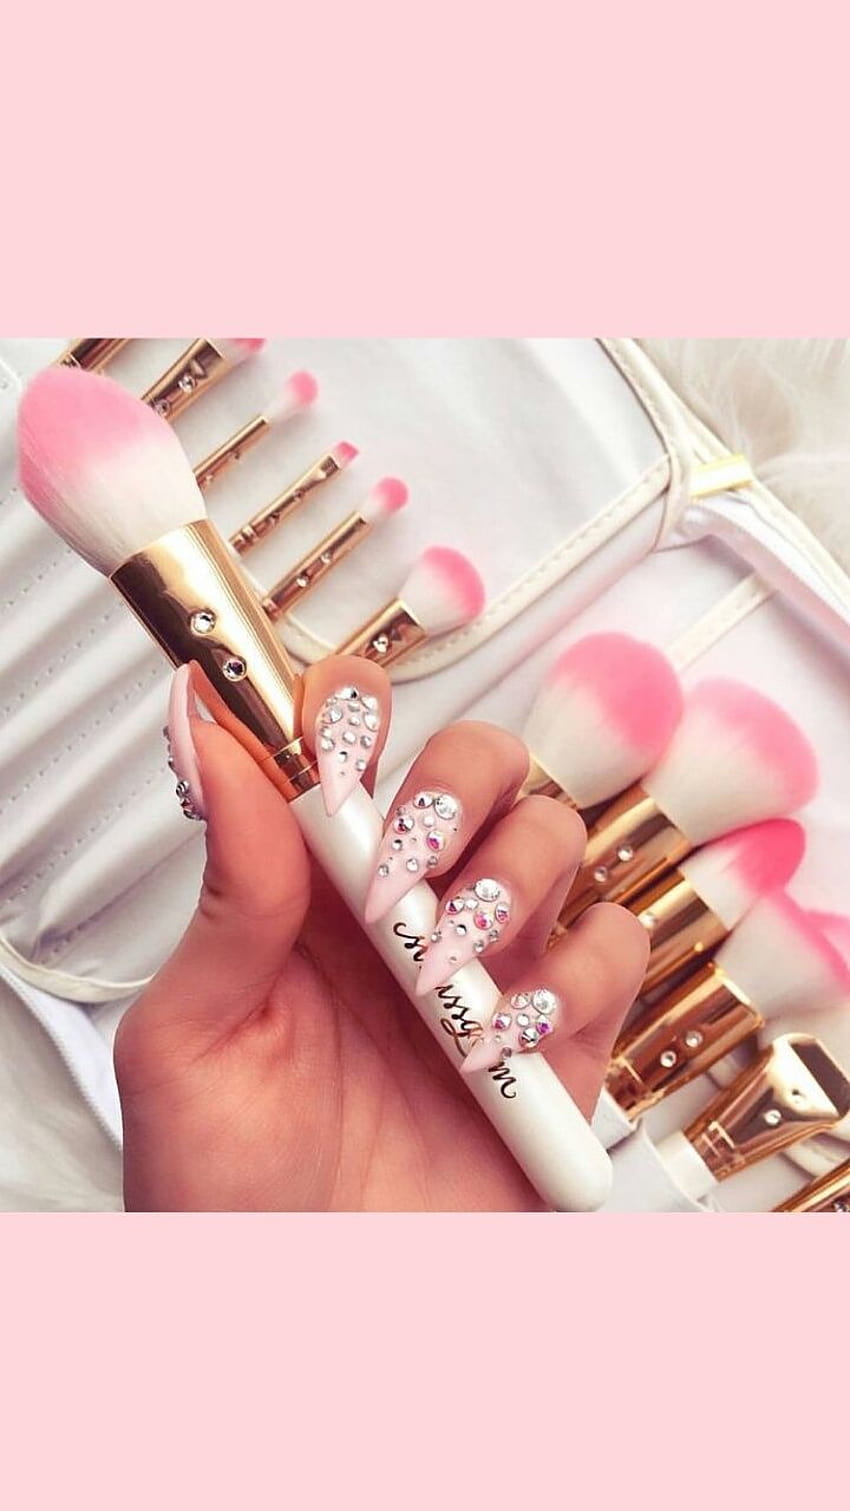 A set of makeup brushes with a pink and white design - Nails